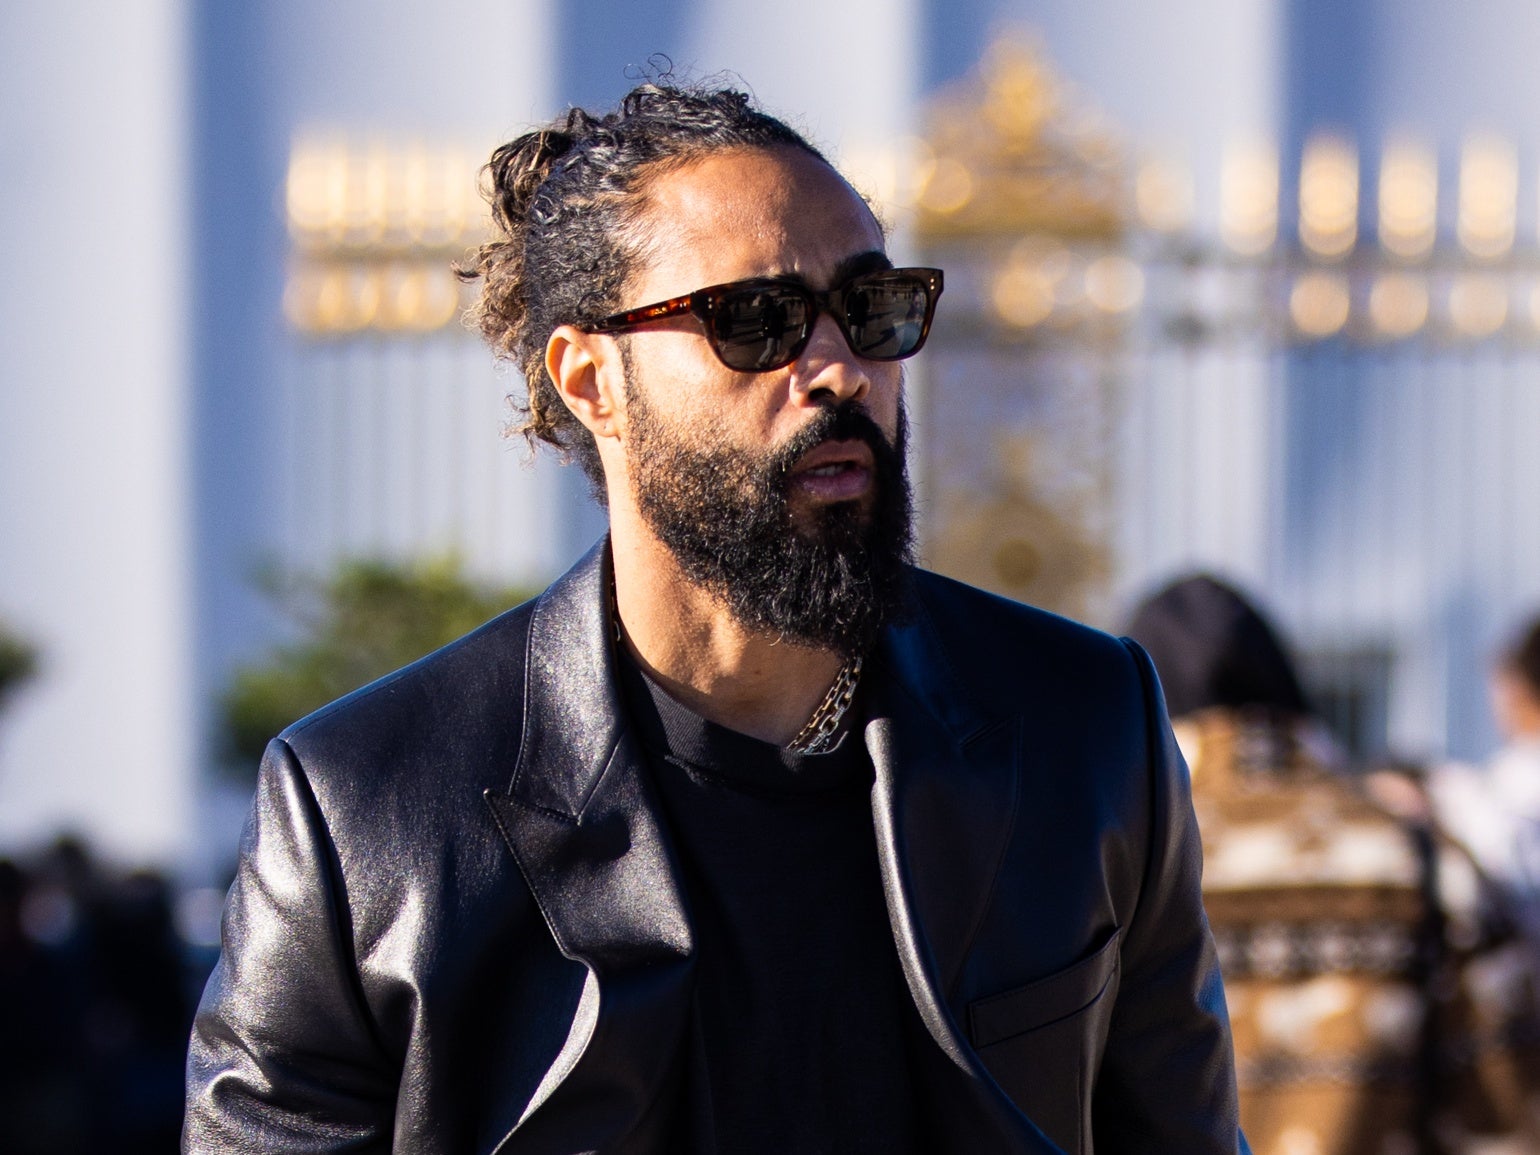 Jerry Lorenzo Calls Out White Privilege In Response To Attack On Capitol